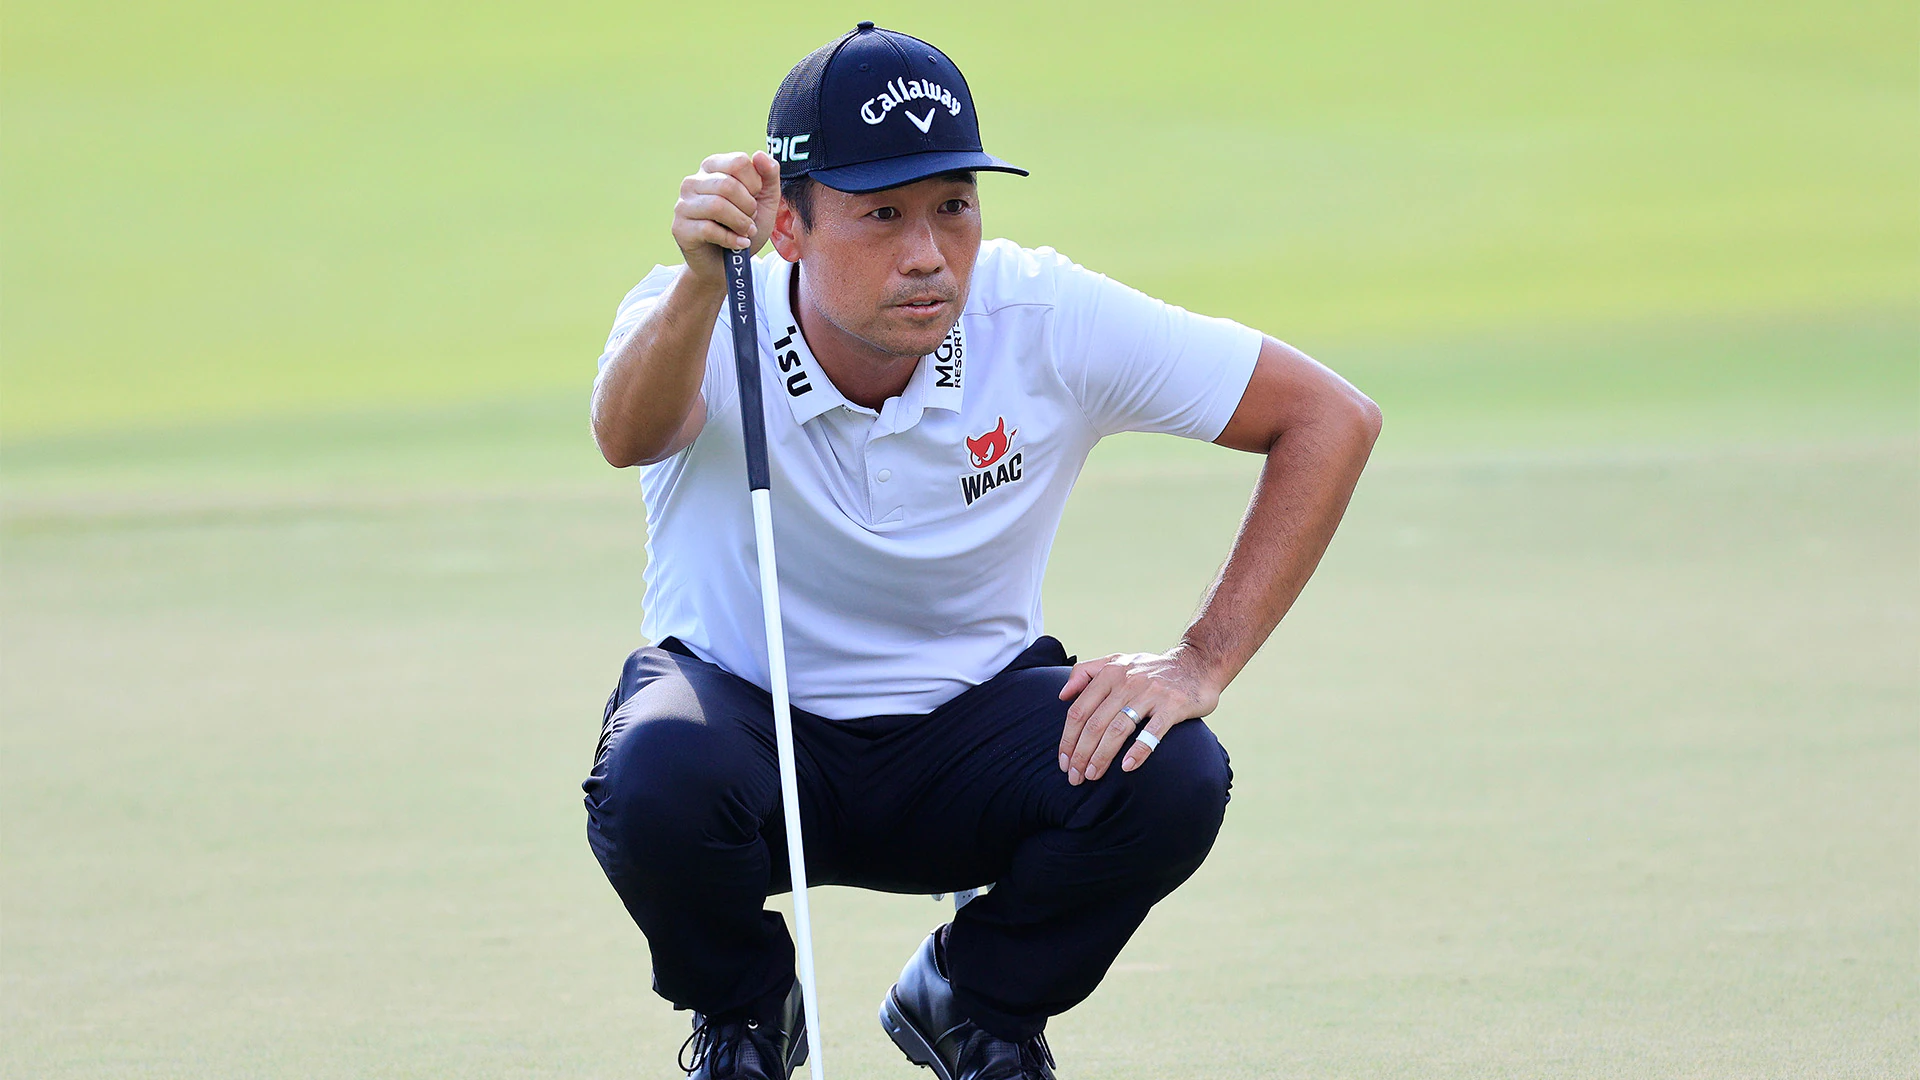 Kevin Na to text Steve Stricker after impressive Tour Champ. performance